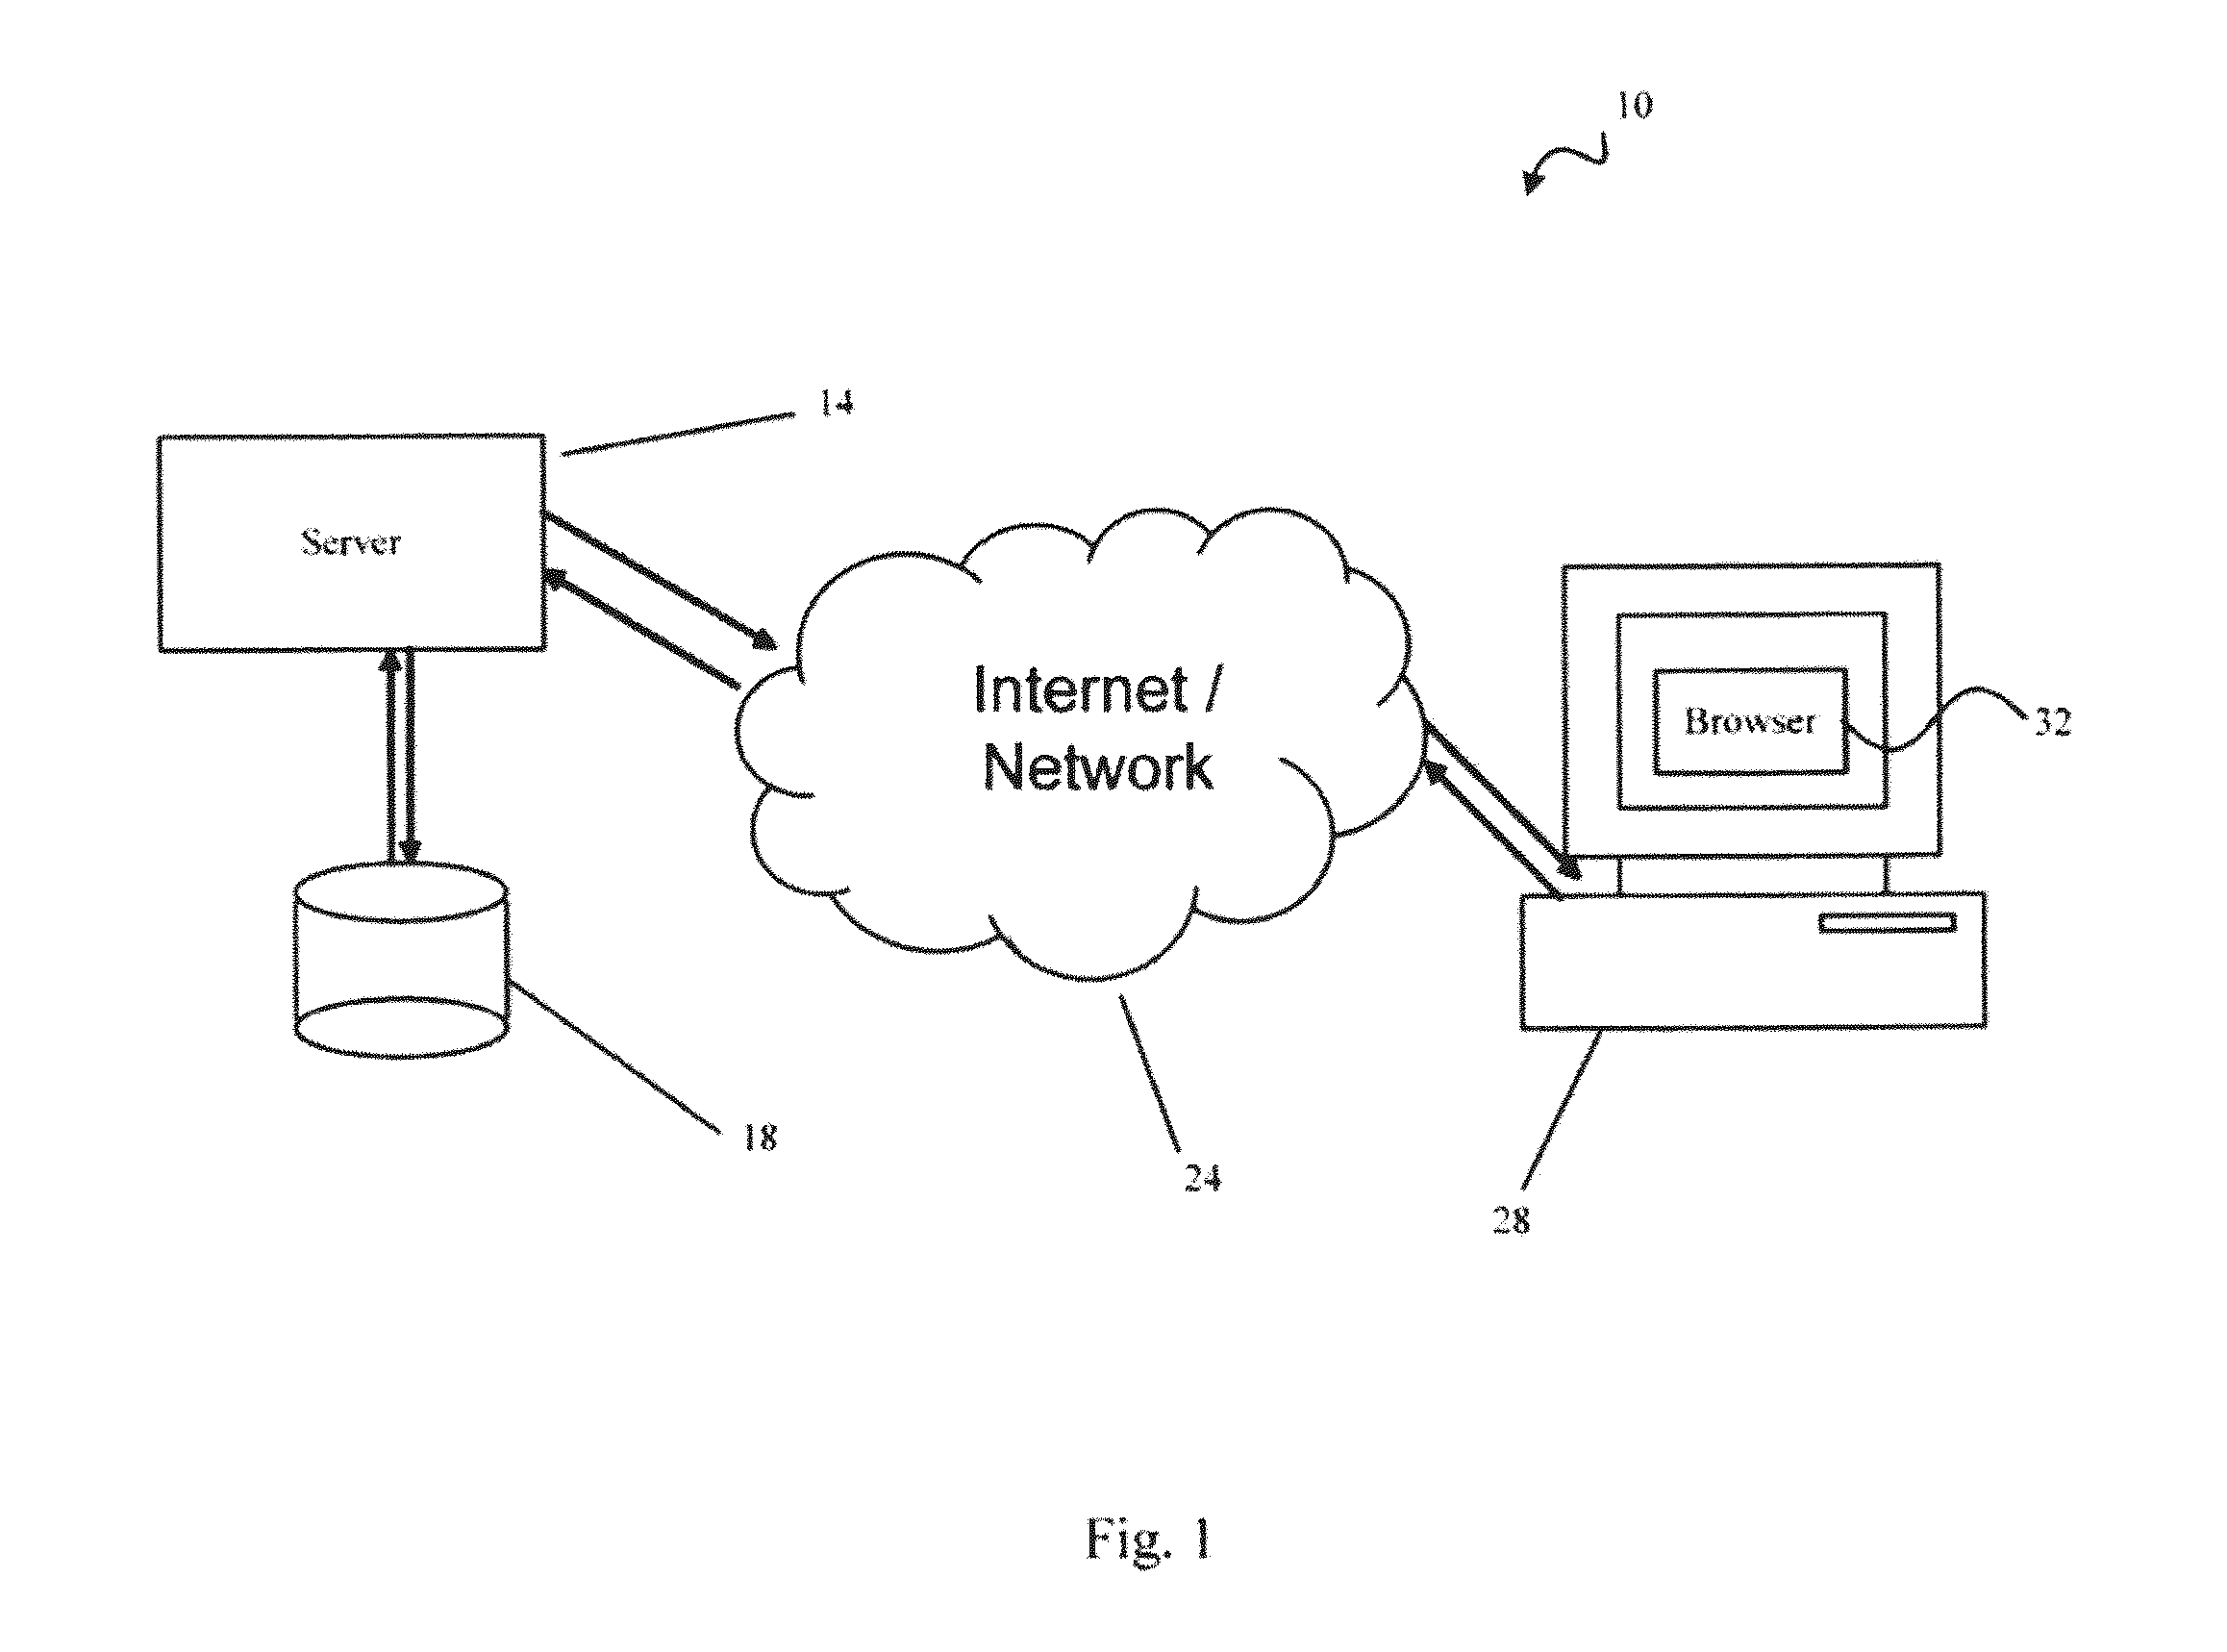 Systems and Methods of Generating Patient Notes with Inherited Preferences